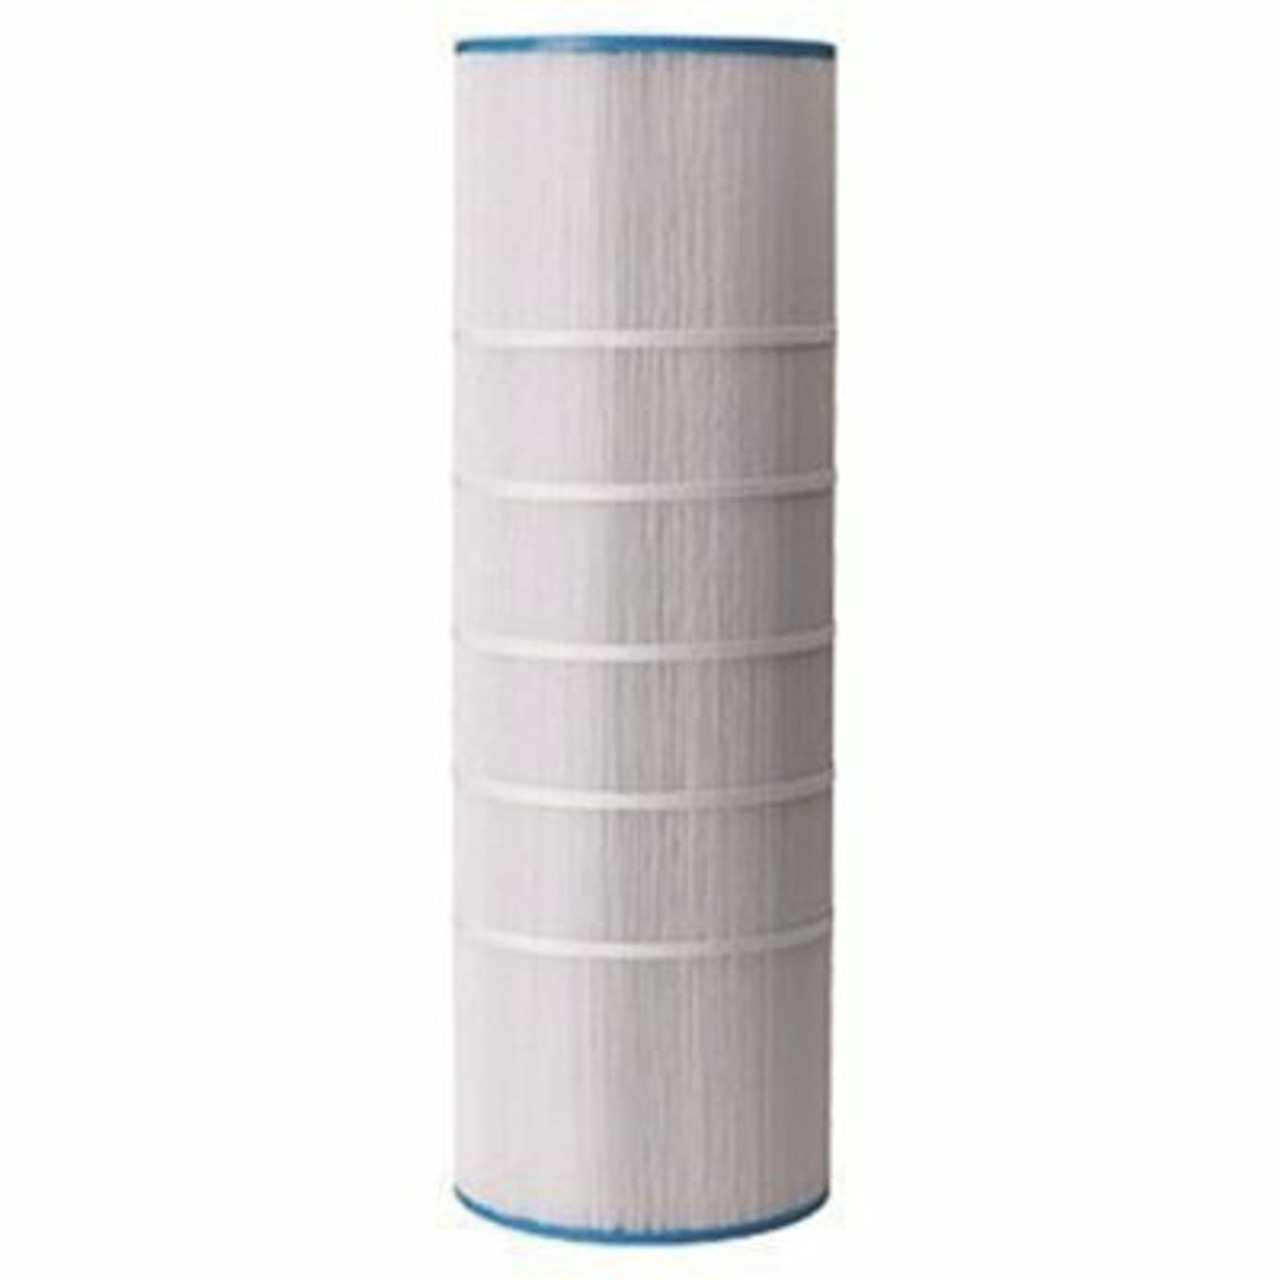 Super-Pro 7 In. Dia 131 Sq. Ft. Pool Filter Replacement Outside Cartridge